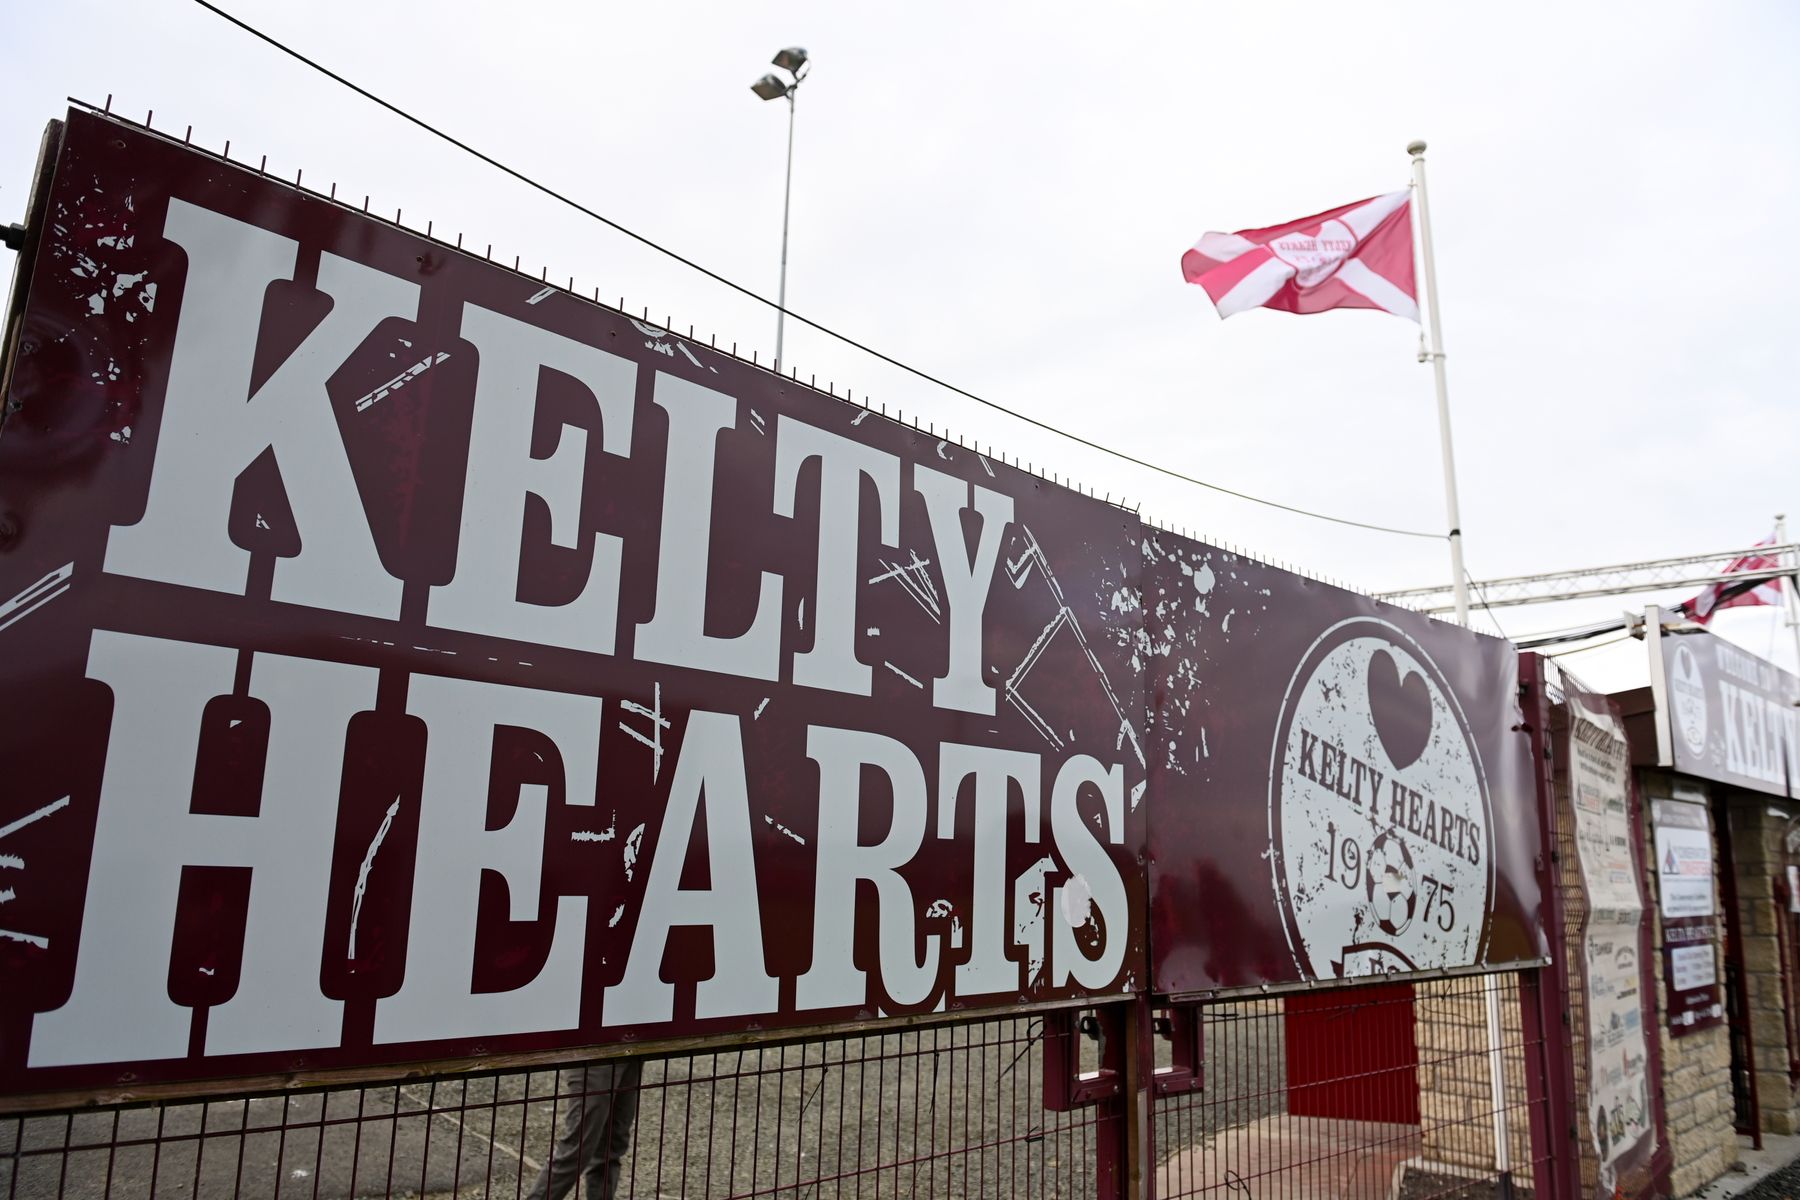 Supporter Info: Kelty Hearts (A)